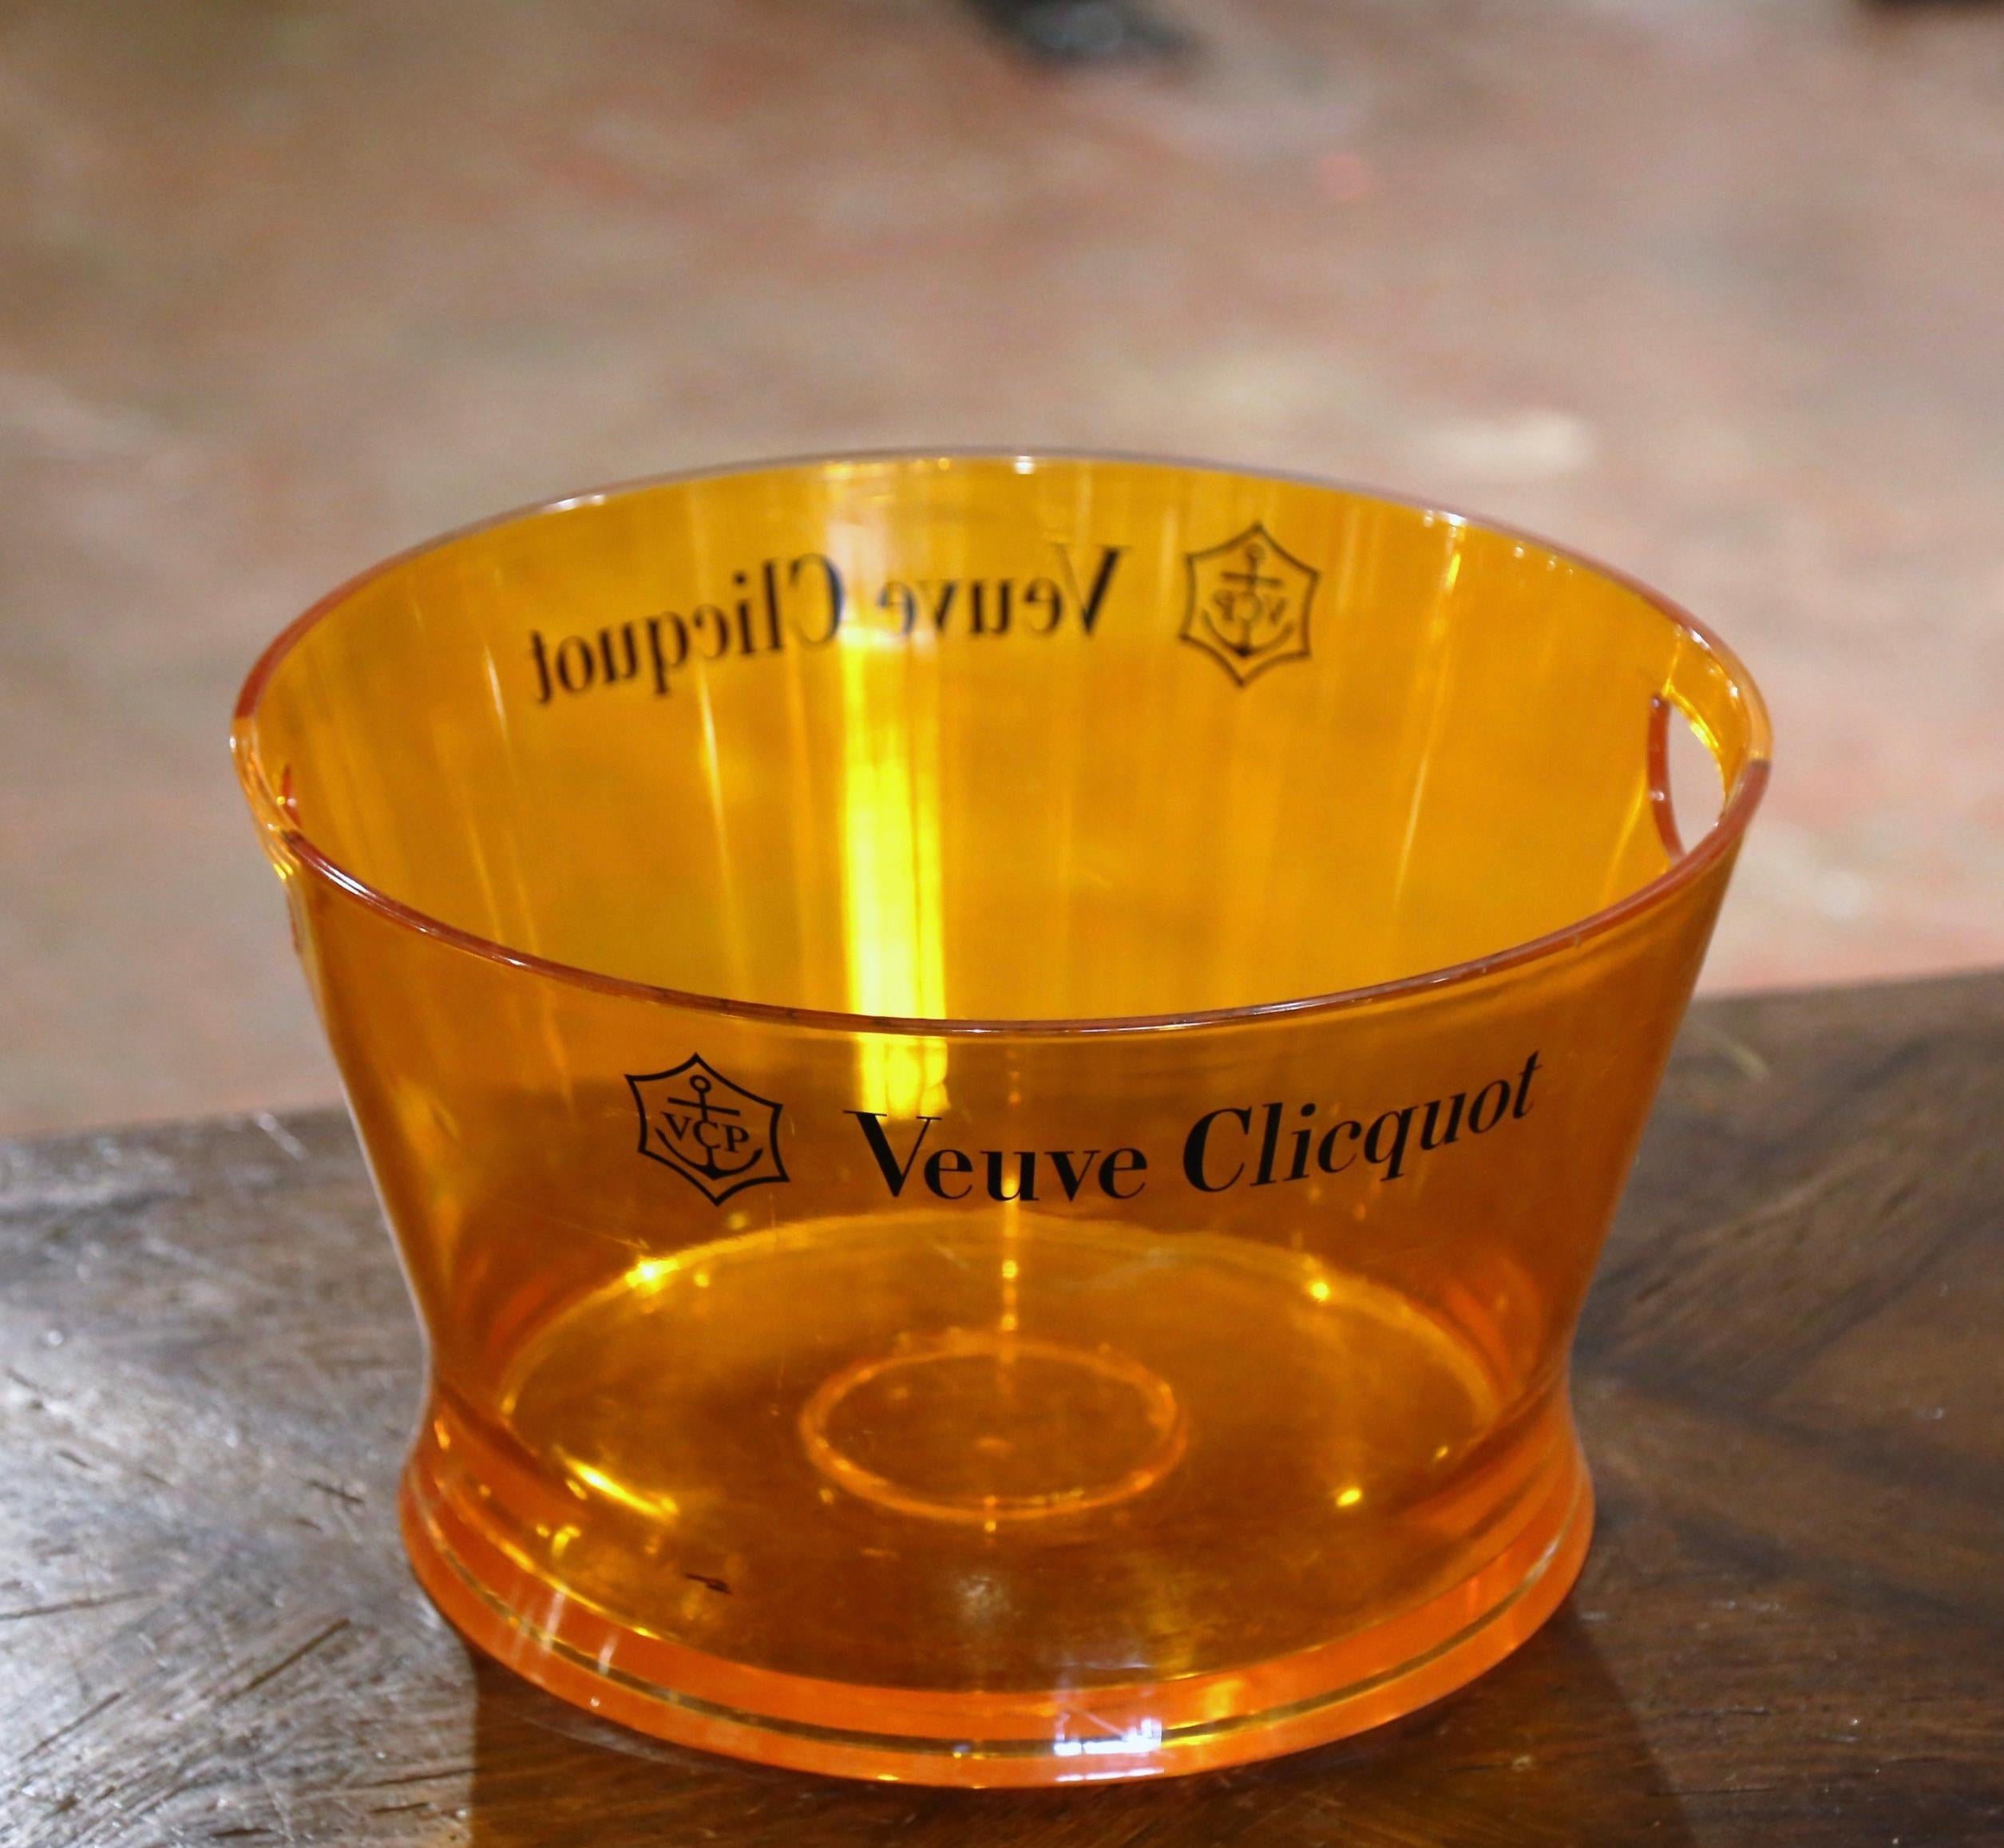 Decorate a wet bar or wine cellar with this elegant and rare champagne cooler. Crafted in France circa 1980 and made of hard plastic, the vintage bucket comes from the iconic House of Veuve Clicquot. The orange tub dressed with pierced side handles,